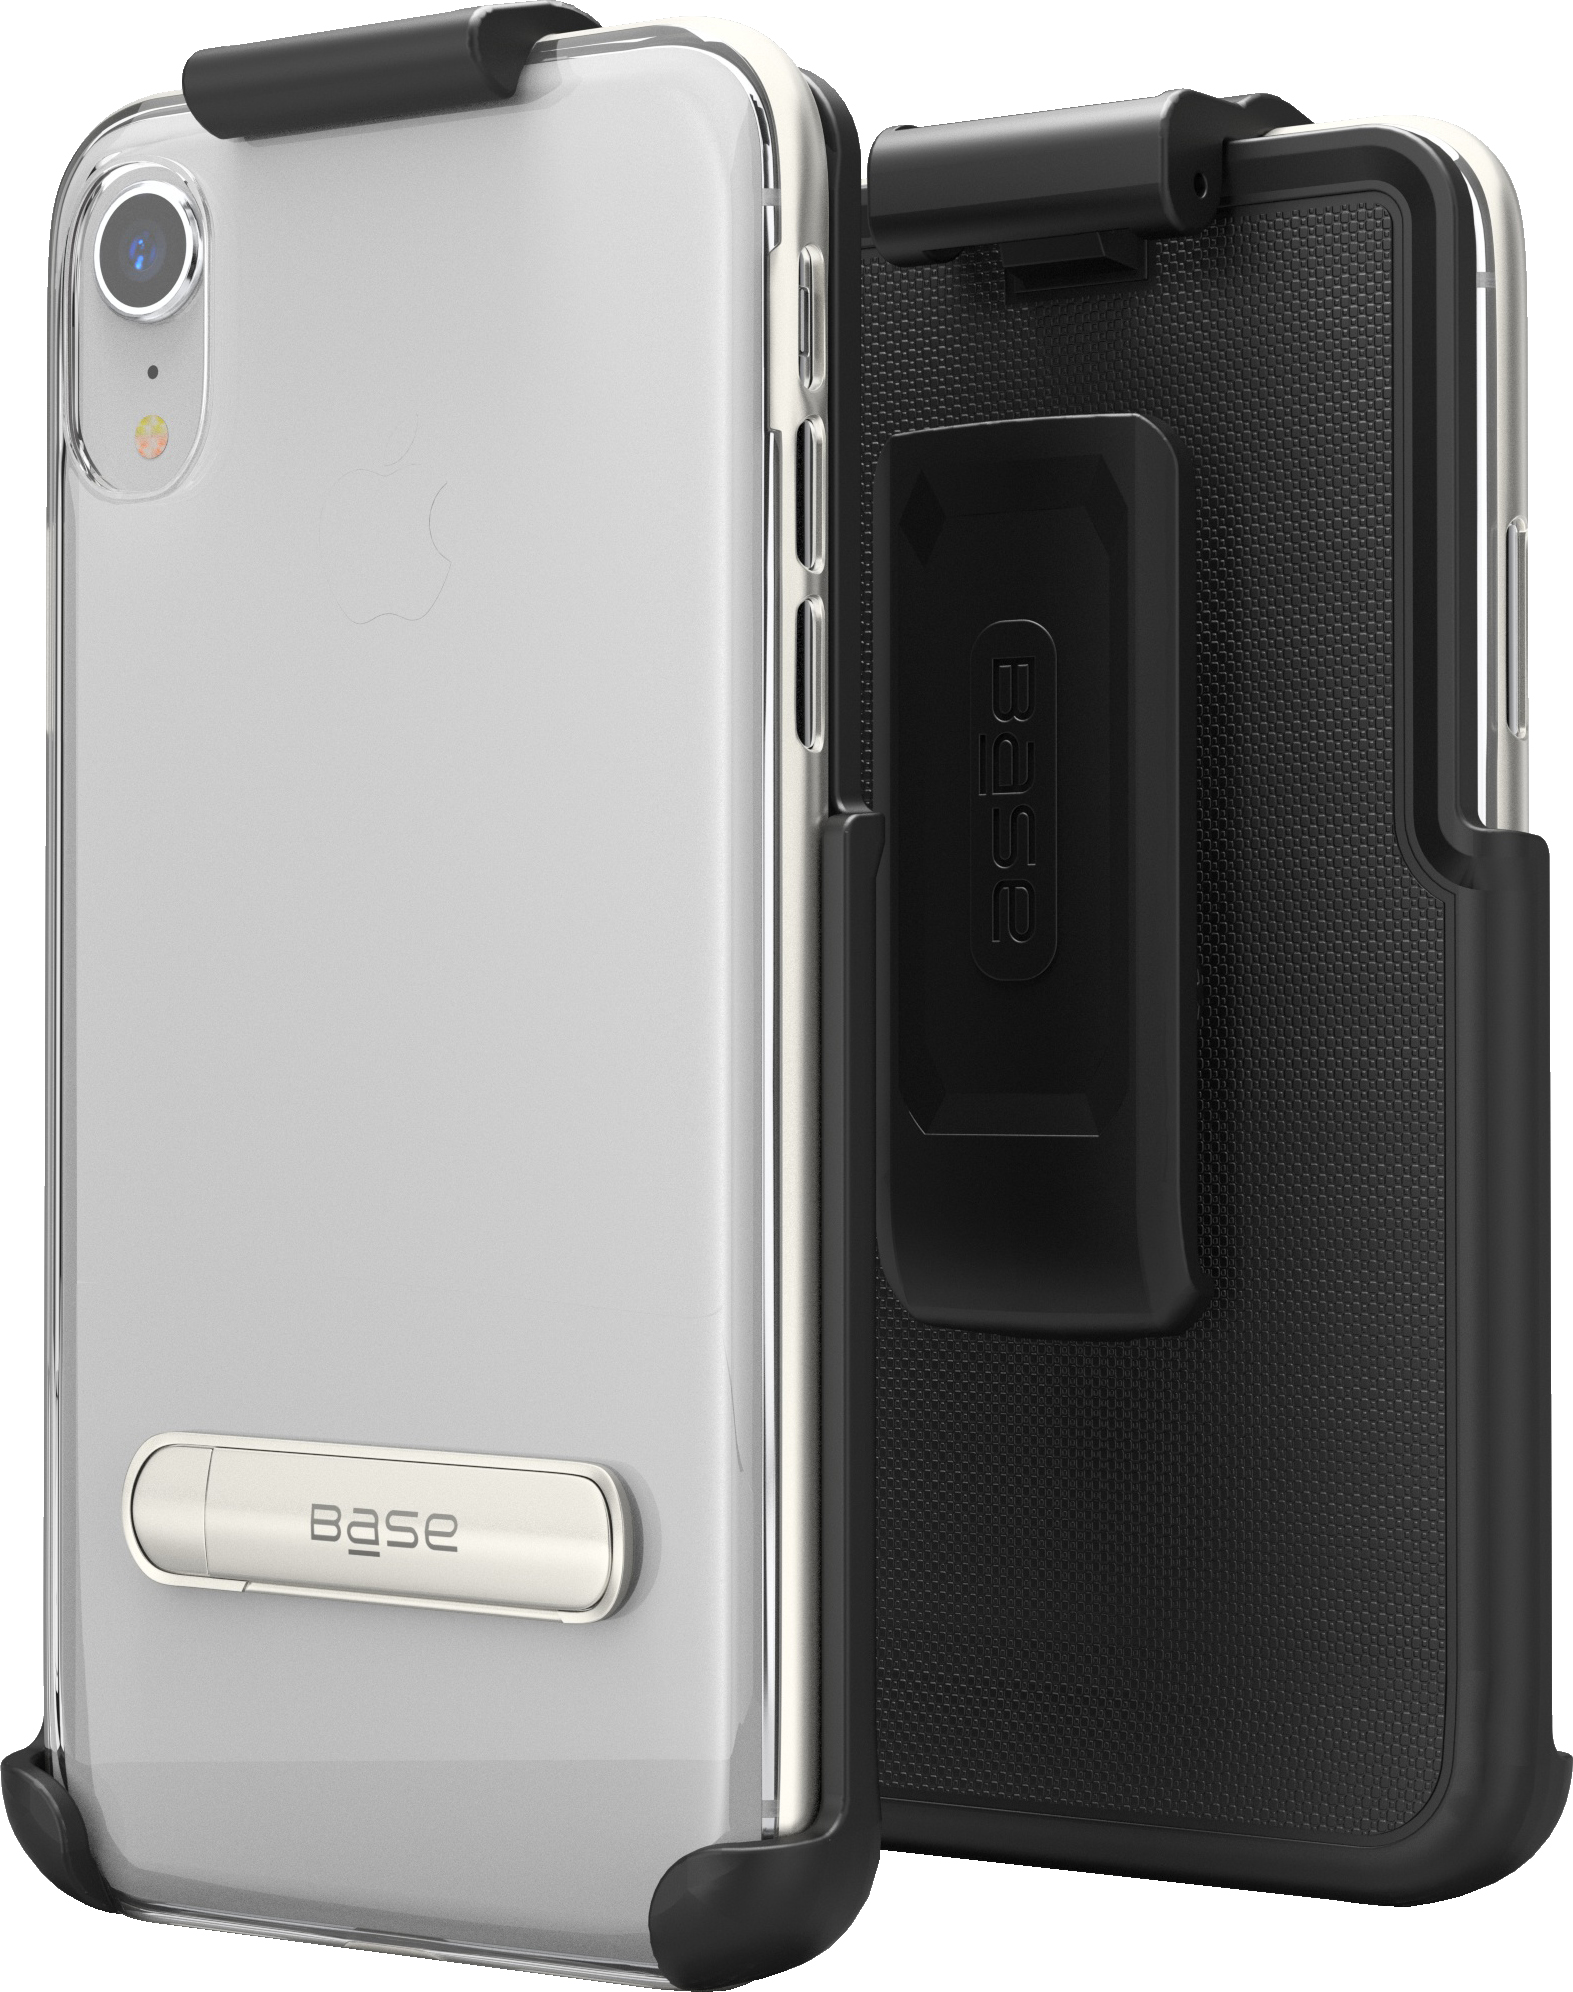 Two piece - black and clear with silver edges case protector with rotating belt clip and metal kickstand for iPhone XR cell phones